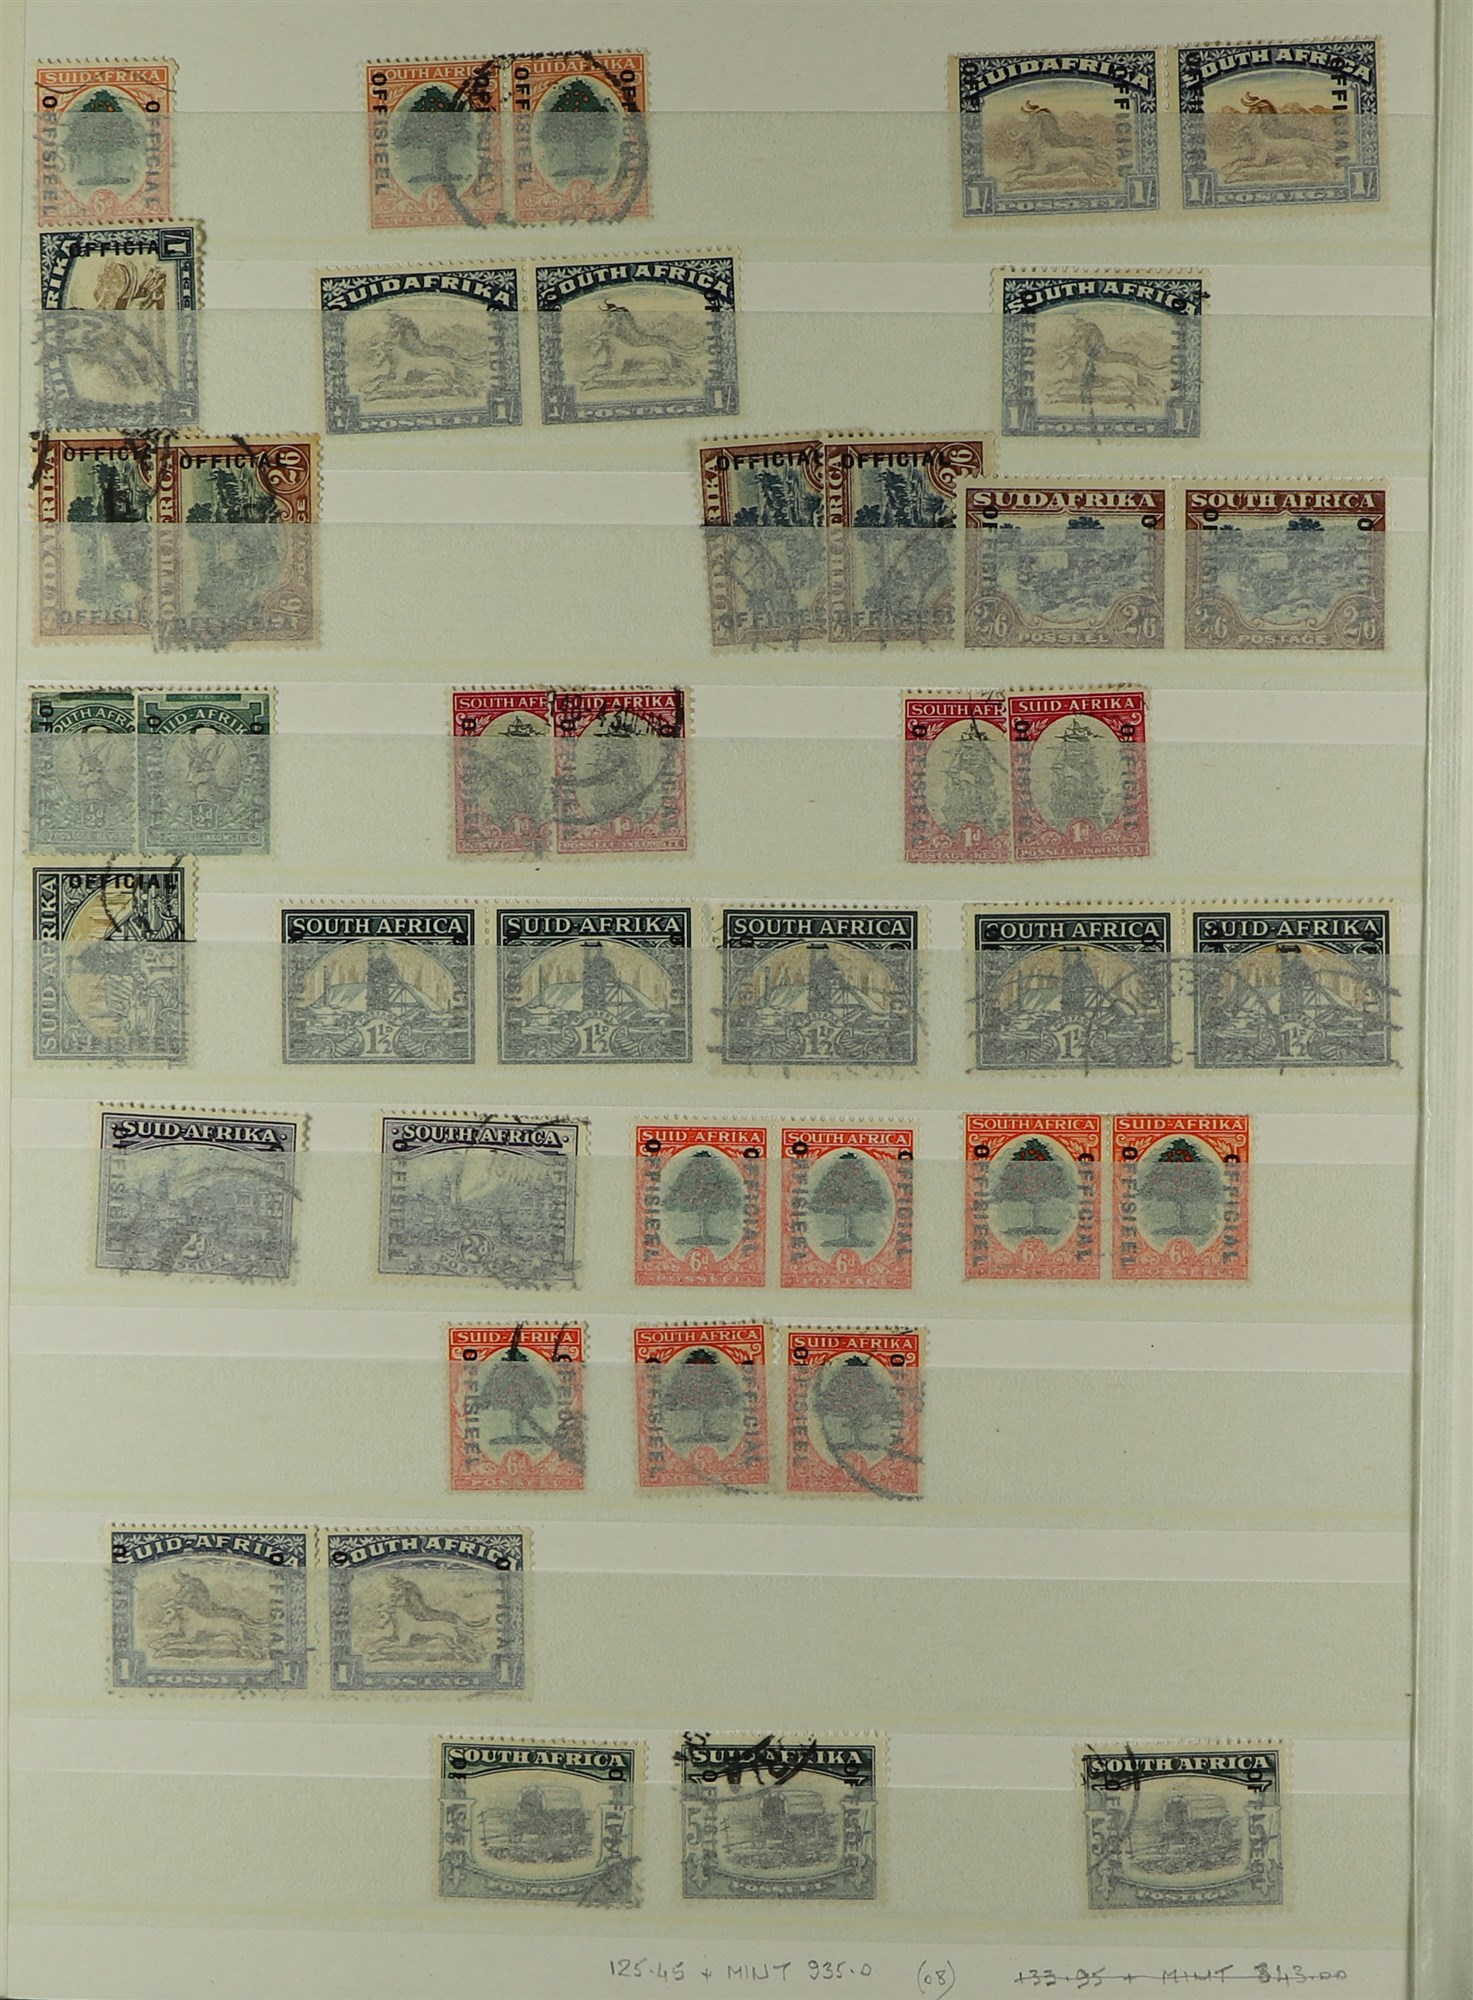 SOUTH AFRICA 1913 - 2000 COLLECTION / ACCUMULATION of 1500+ mint / never hinged mint & used stamps - Image 14 of 15